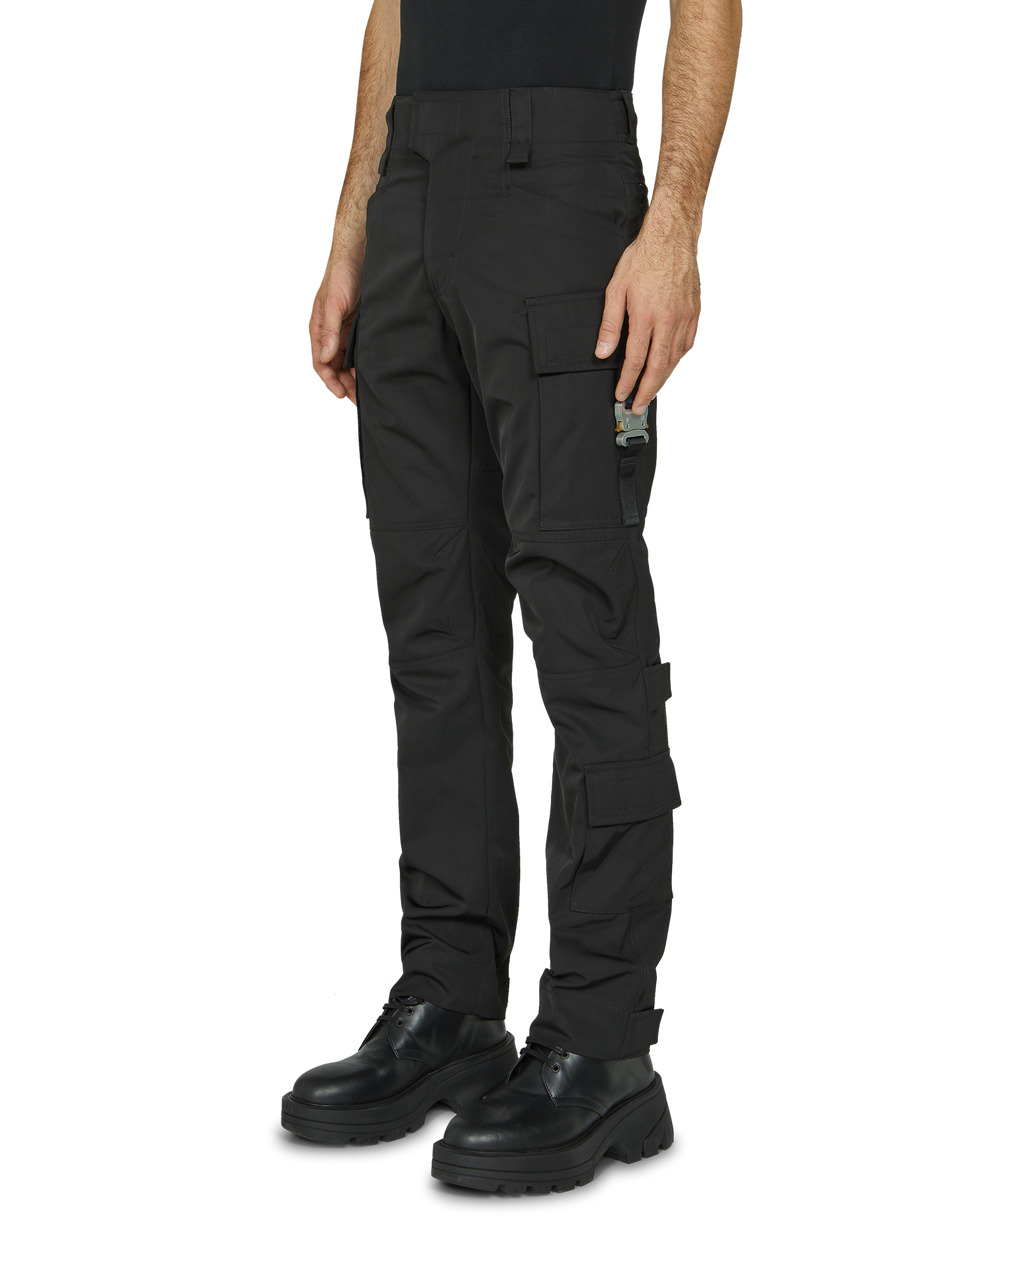 TACTICAL PANT WITH BUCKLE - 4